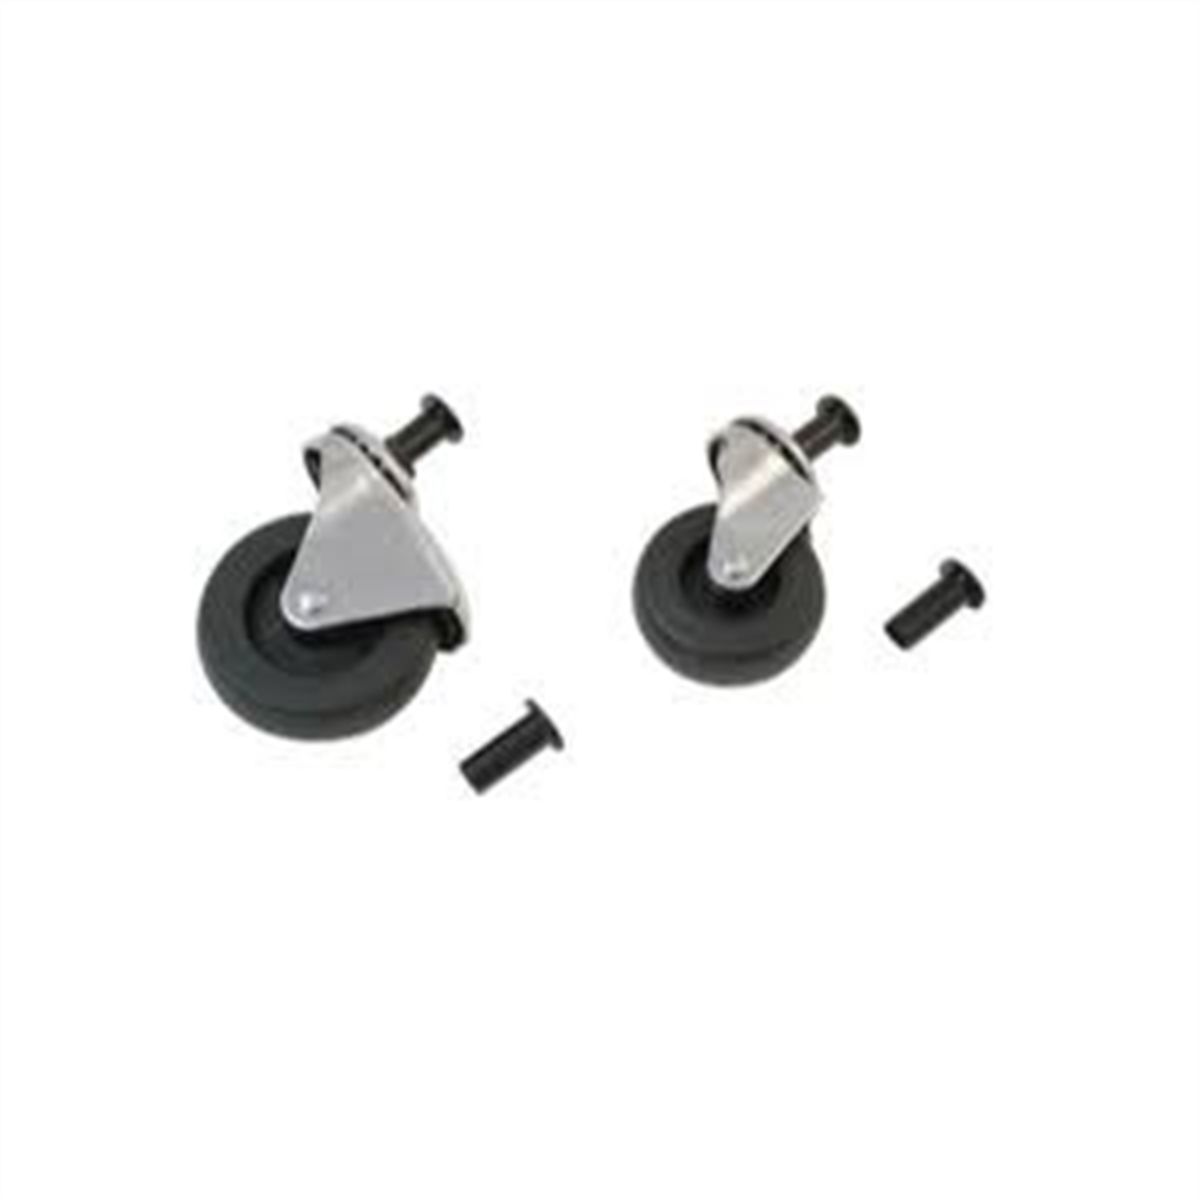 Replacement Caster w/ Nut for 8515 and 8514